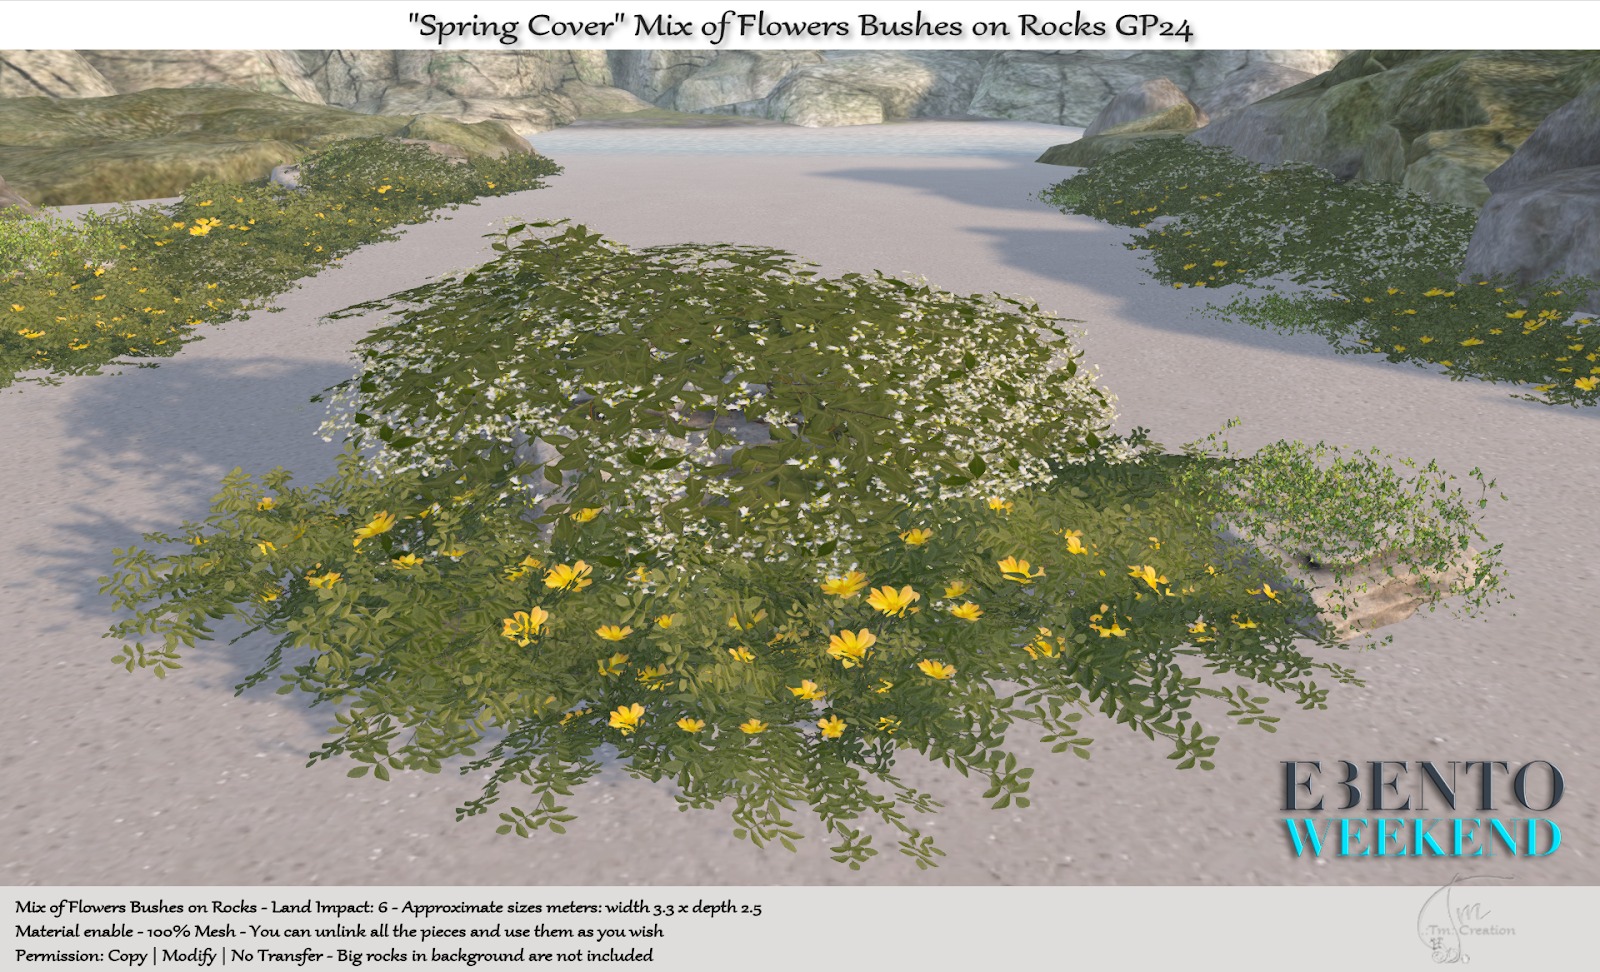 TM Creation – “Spring Cover” Mix of Flowers Bushes on Rocks